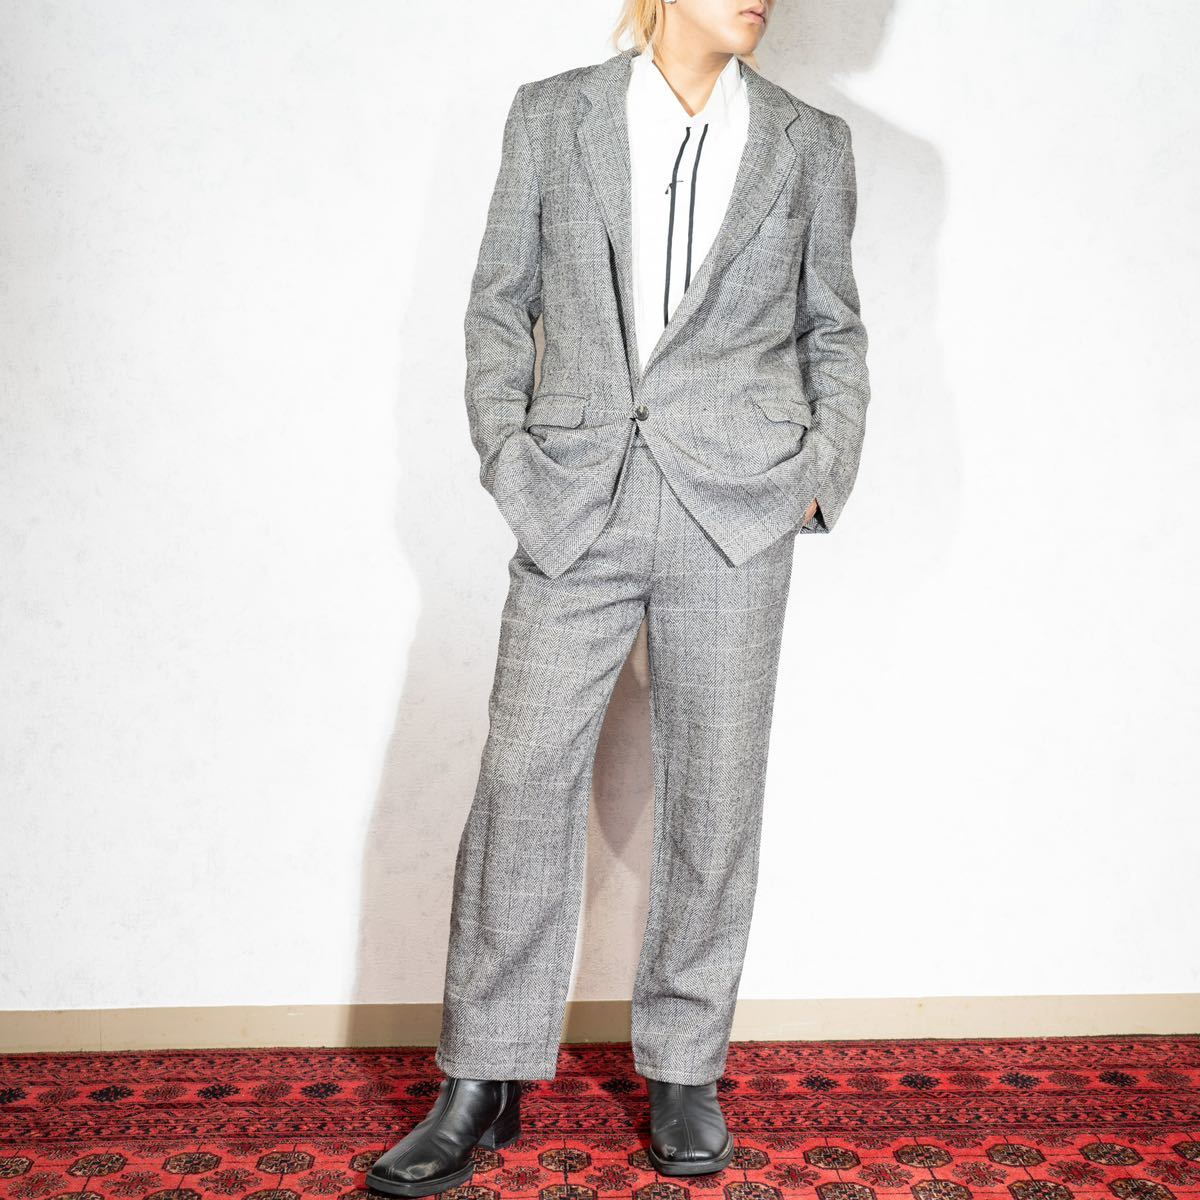 EU VINTAGE angelo Litrico CHECK PATTERNED TWEED SET UP SUIT/ヨーロッパ古着チェック柄ツイードセットアップスーツ